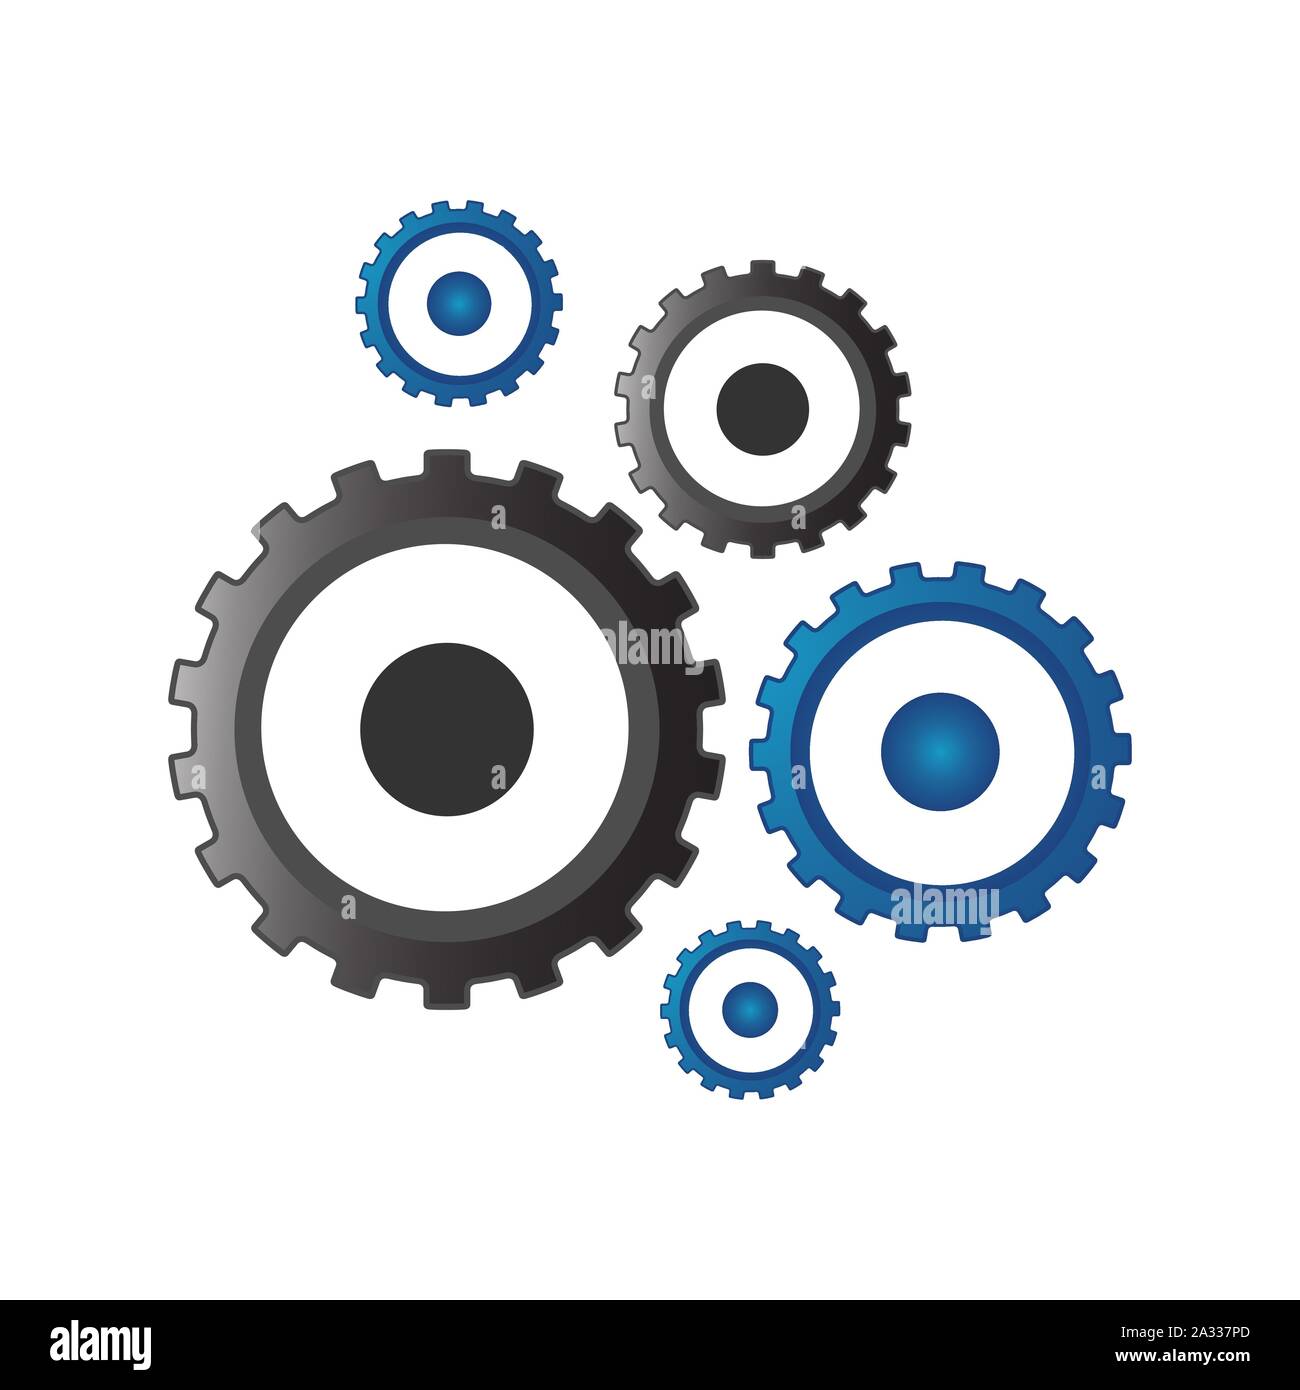 Gears and cogs vector illustration in black and blue styles Stock Vector